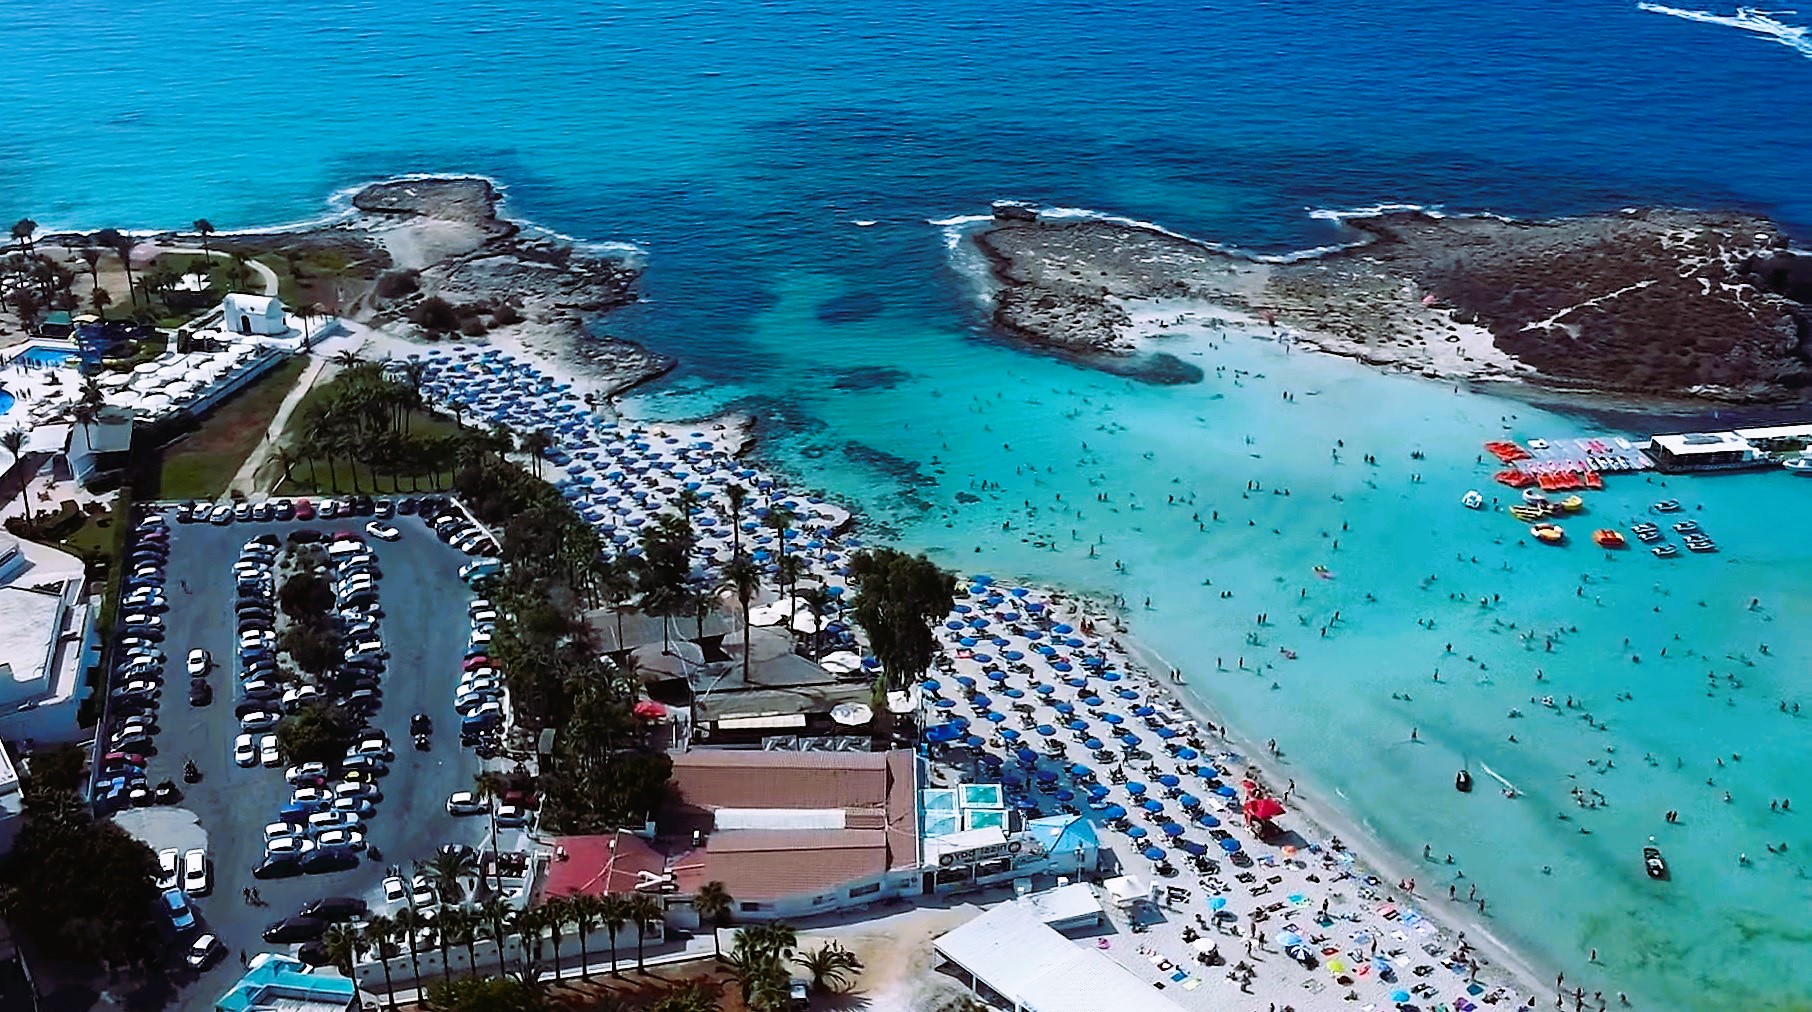 image 3.8 million overnight stays booked in Cyprus last year through online platforms